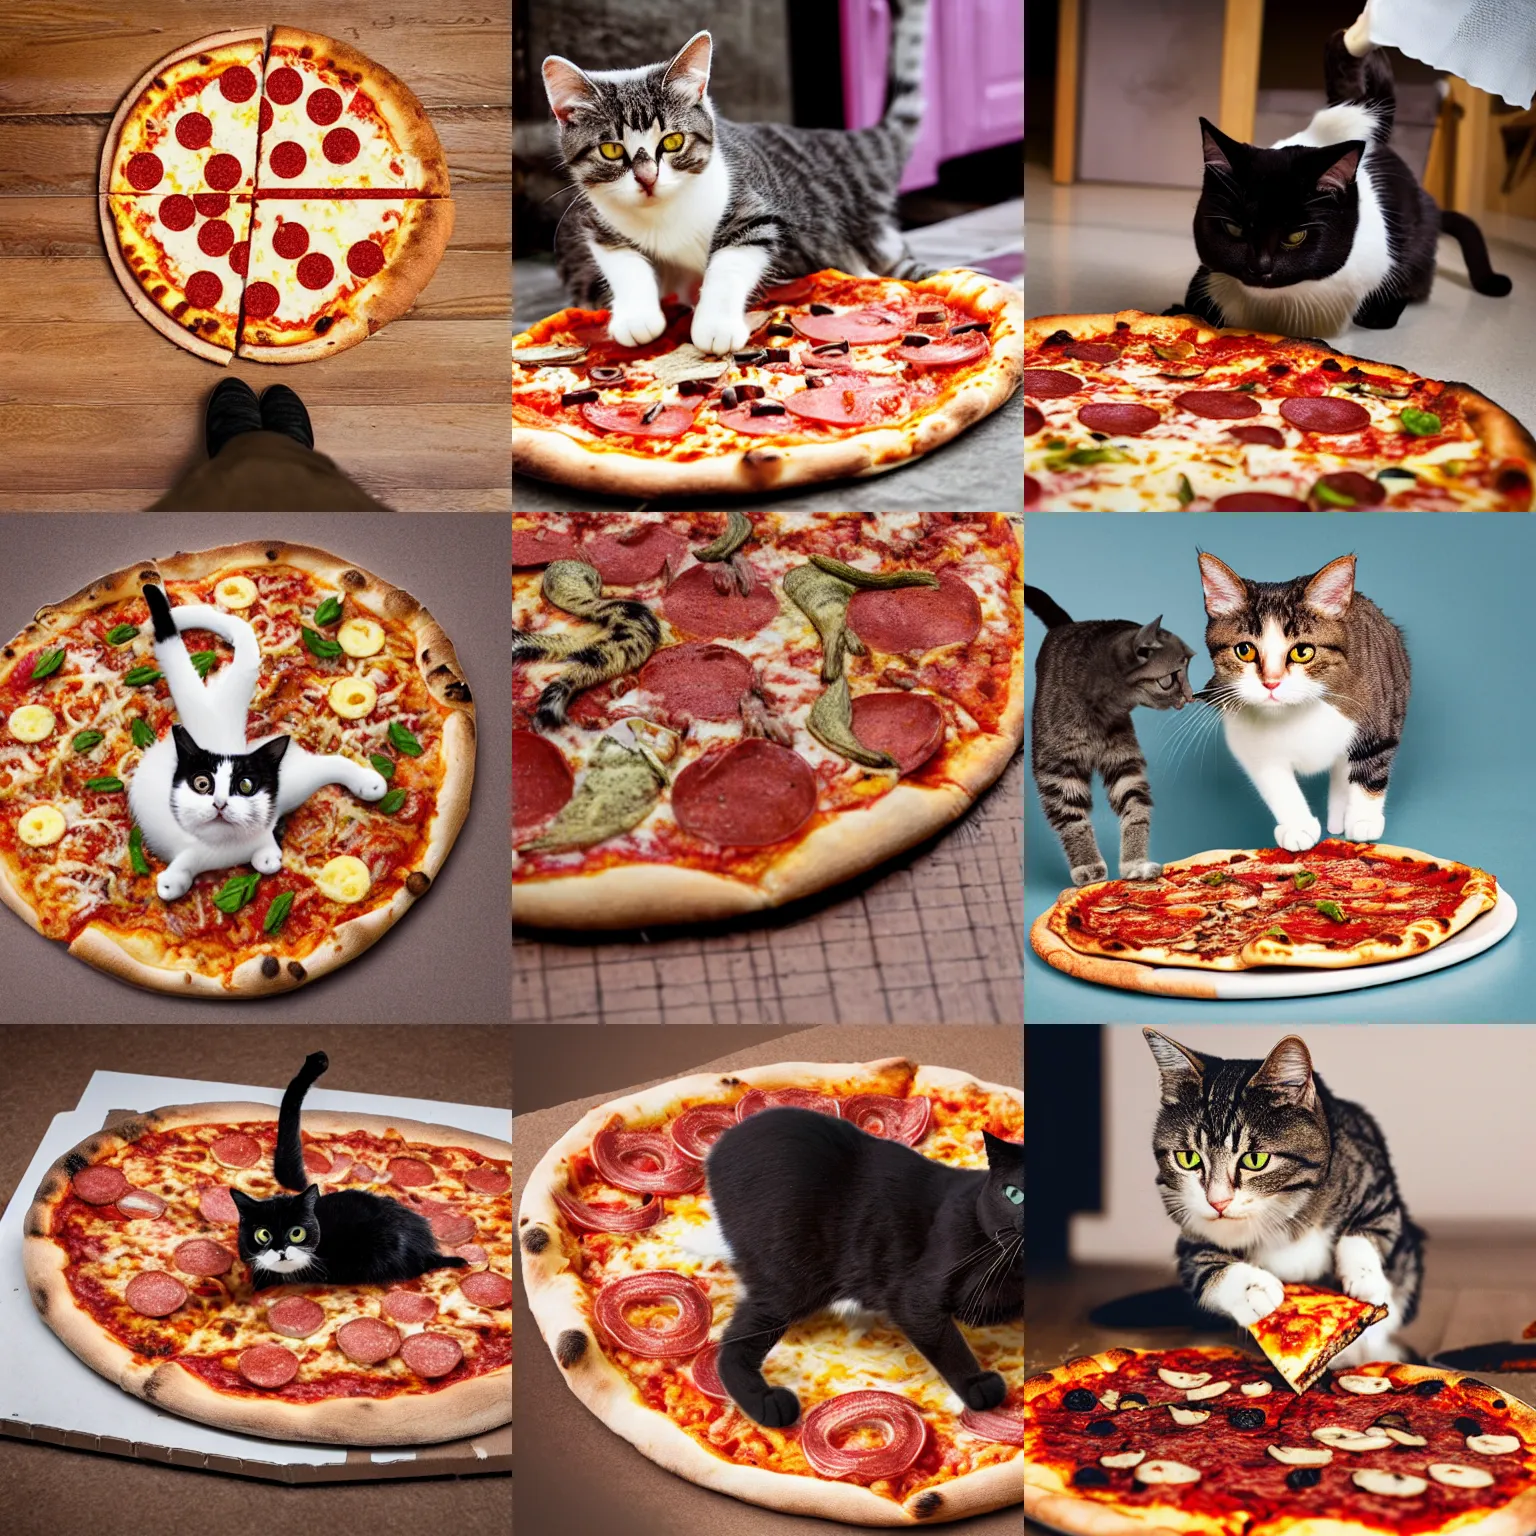 Prompt: a photograph of a cat stomping on a pizza